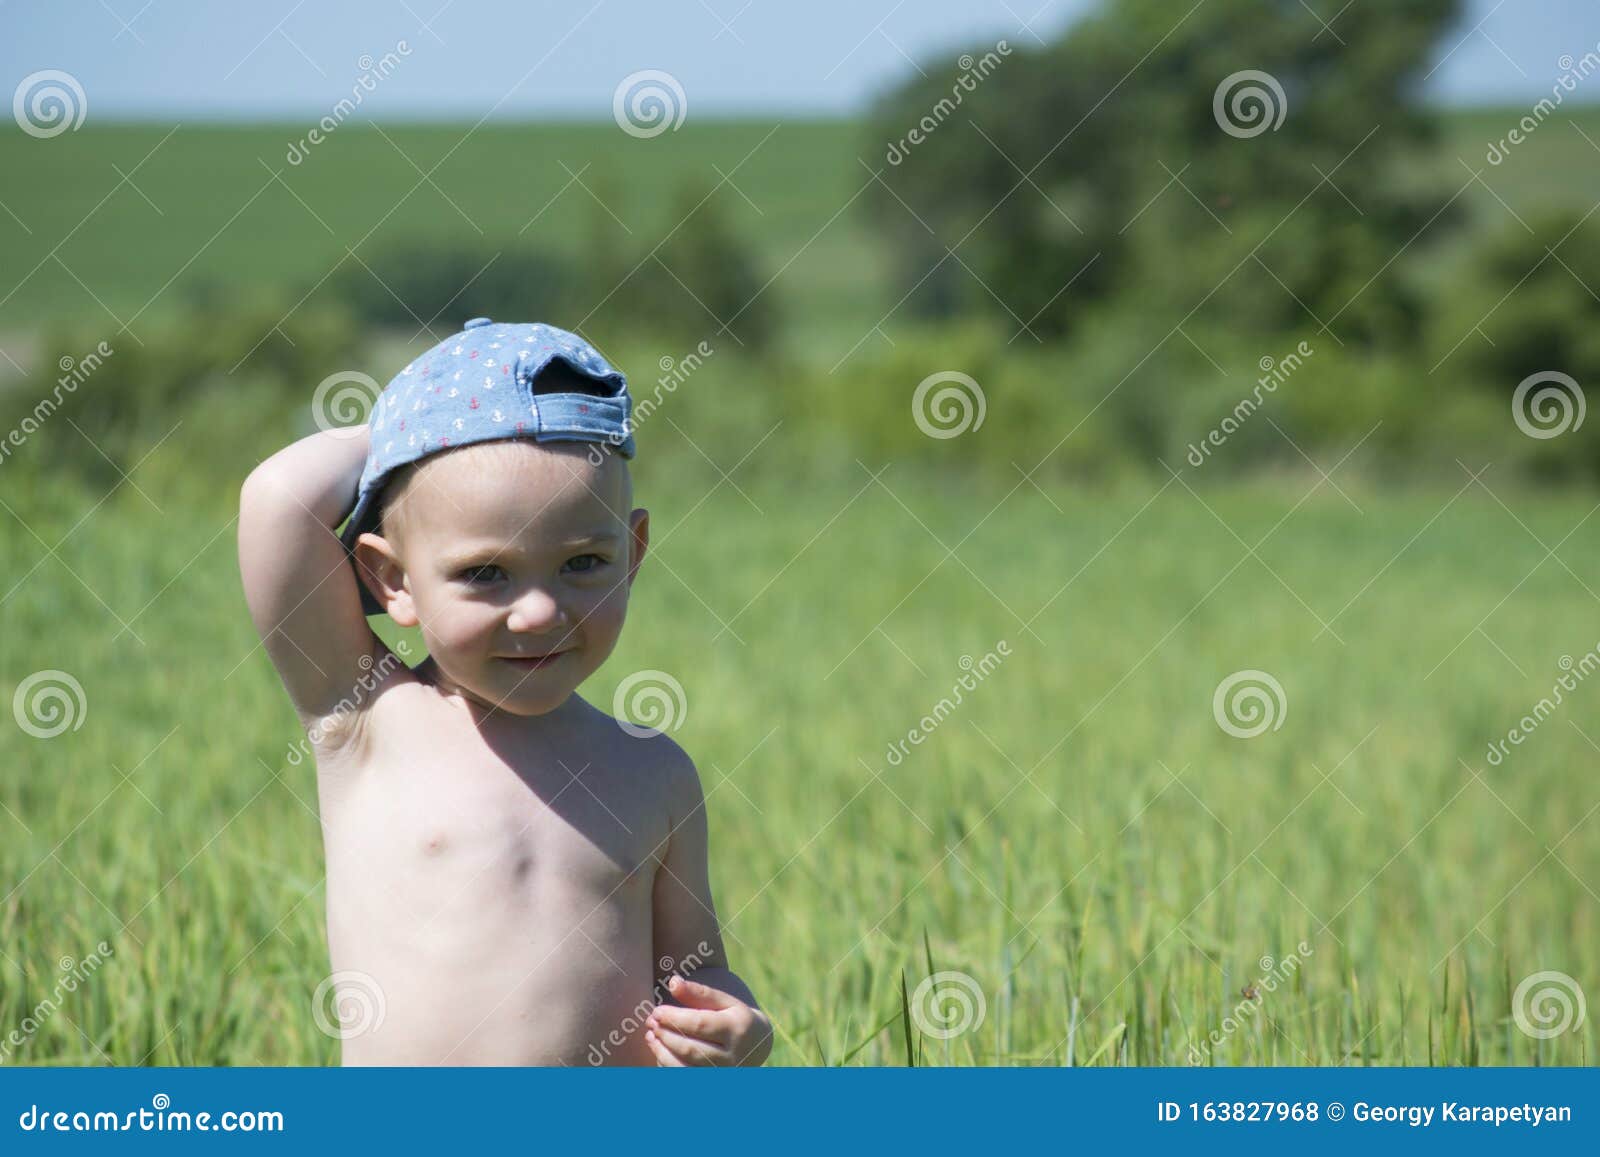 Cute Blond Child Playing in a Green Meadow among Tall Grass Stock Photo ...